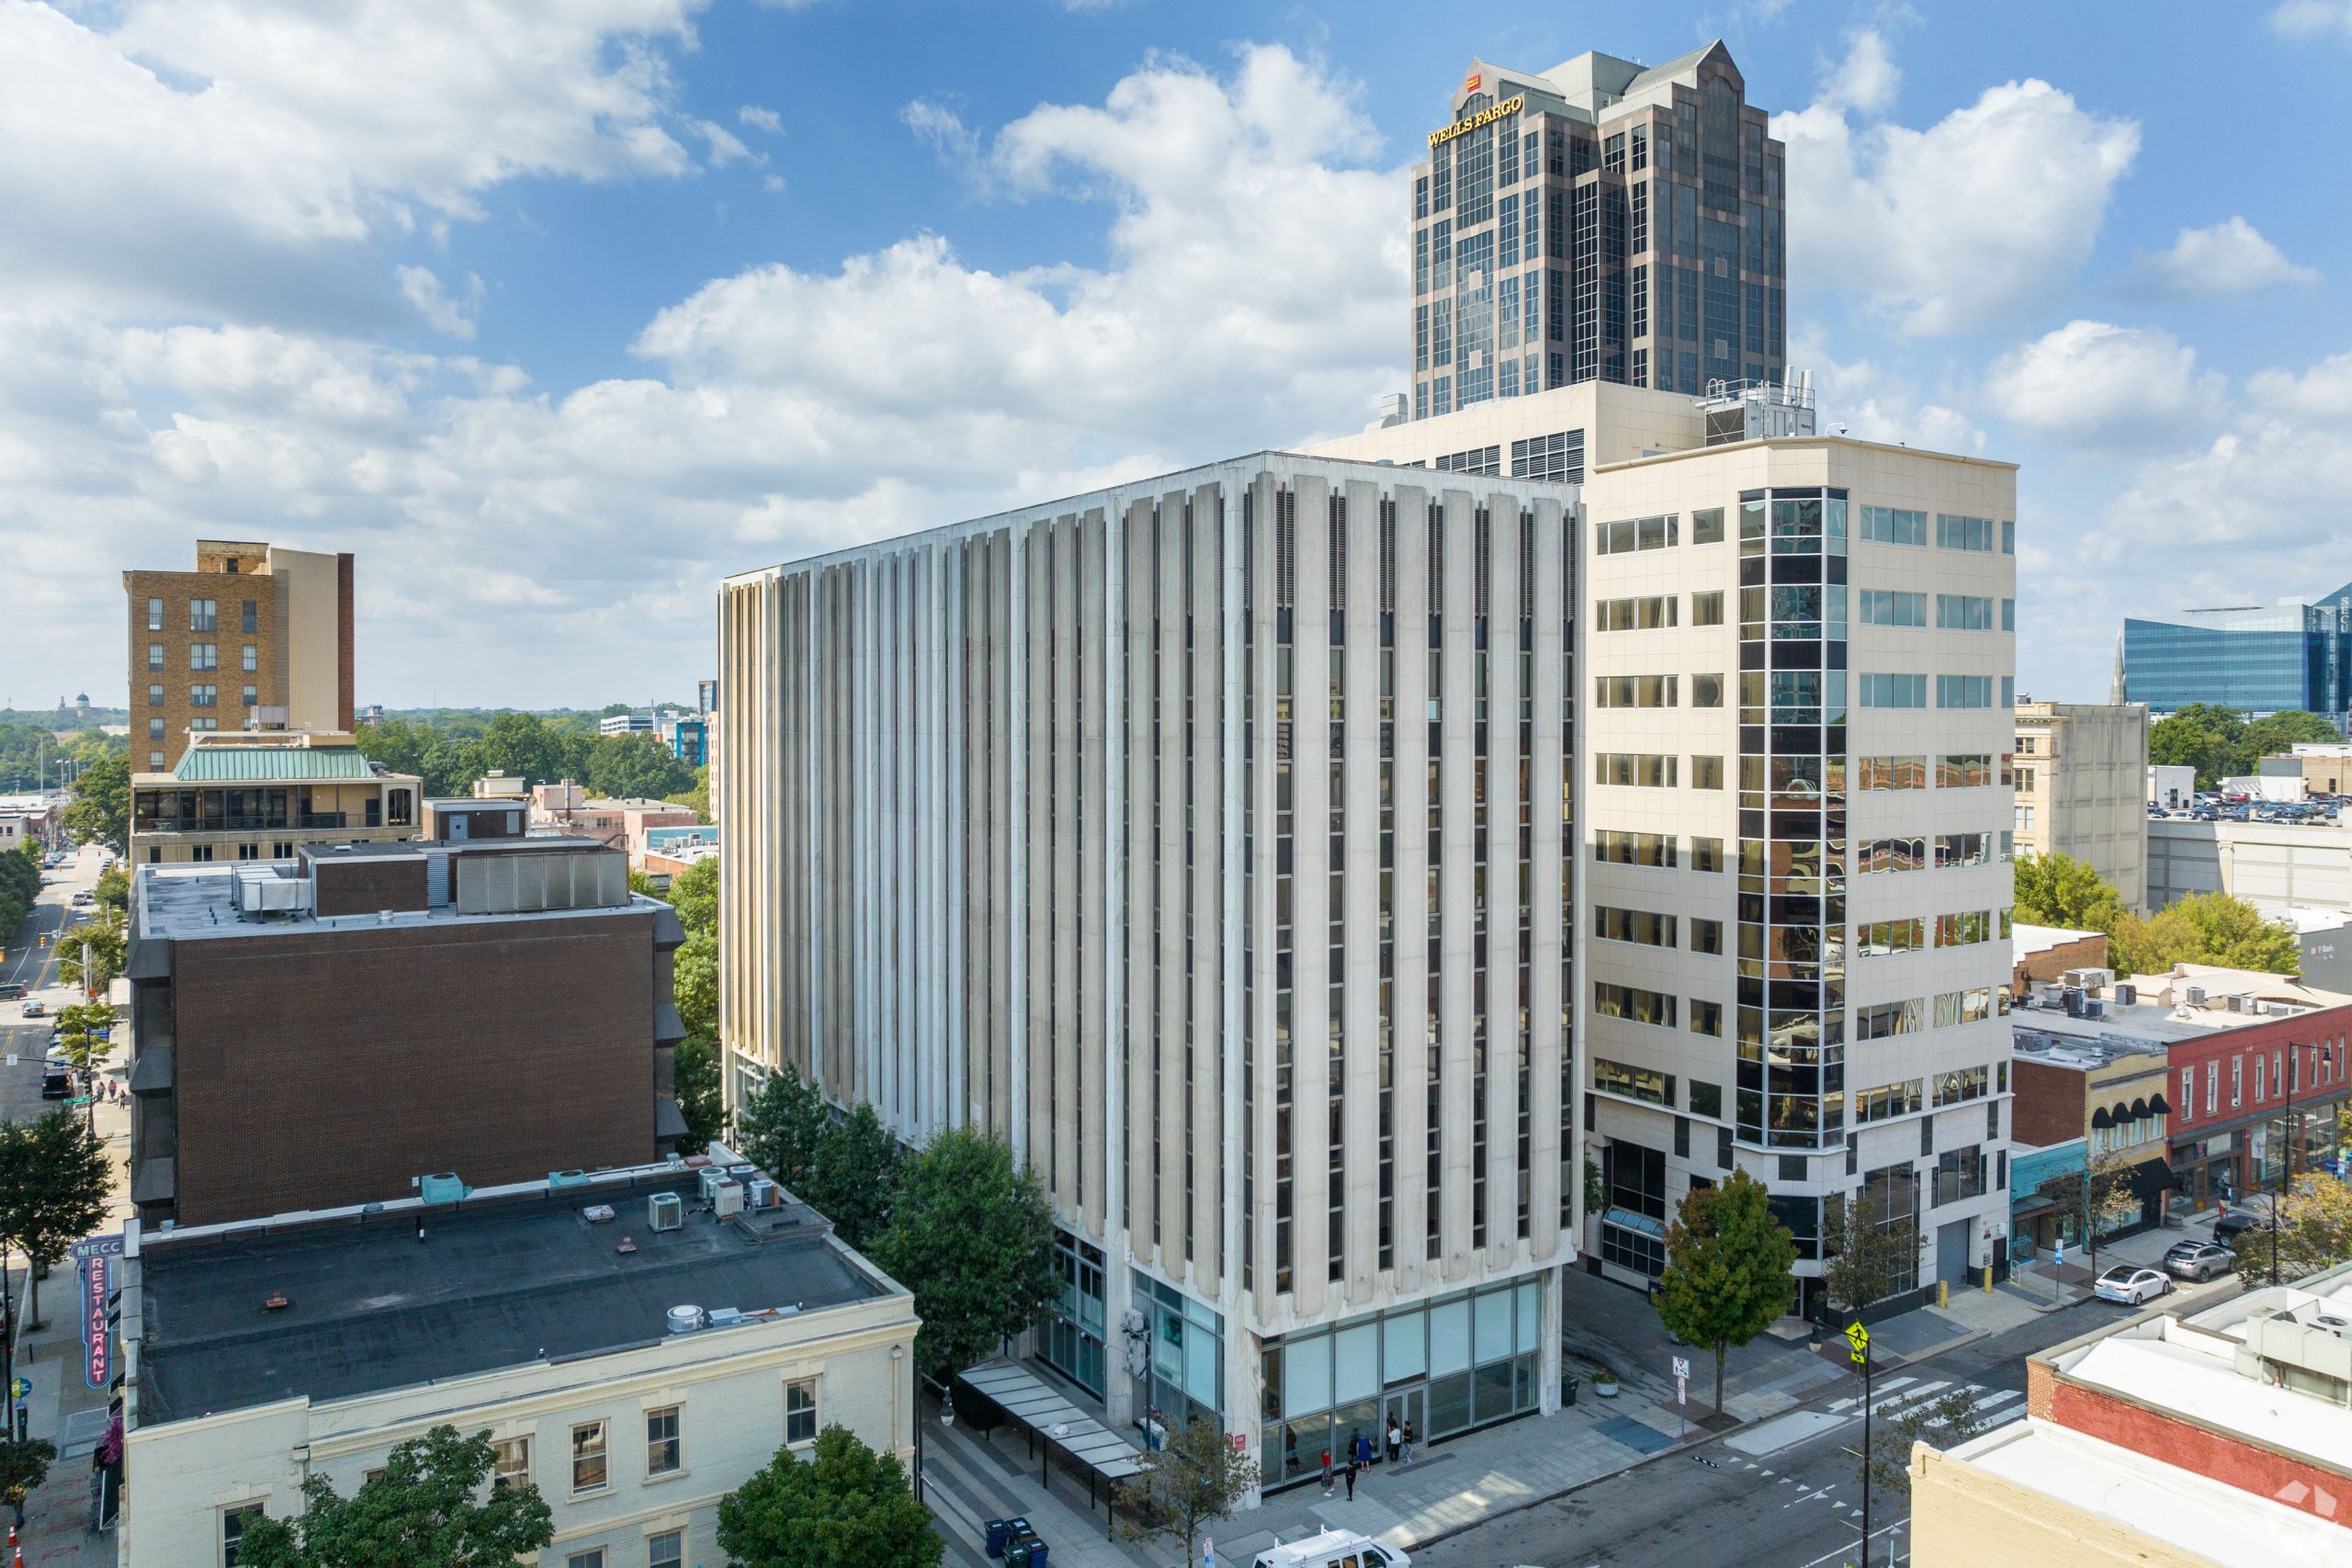 LM Restaurants Purchases Fayetteville Street Office Building In Downtown Raleigh